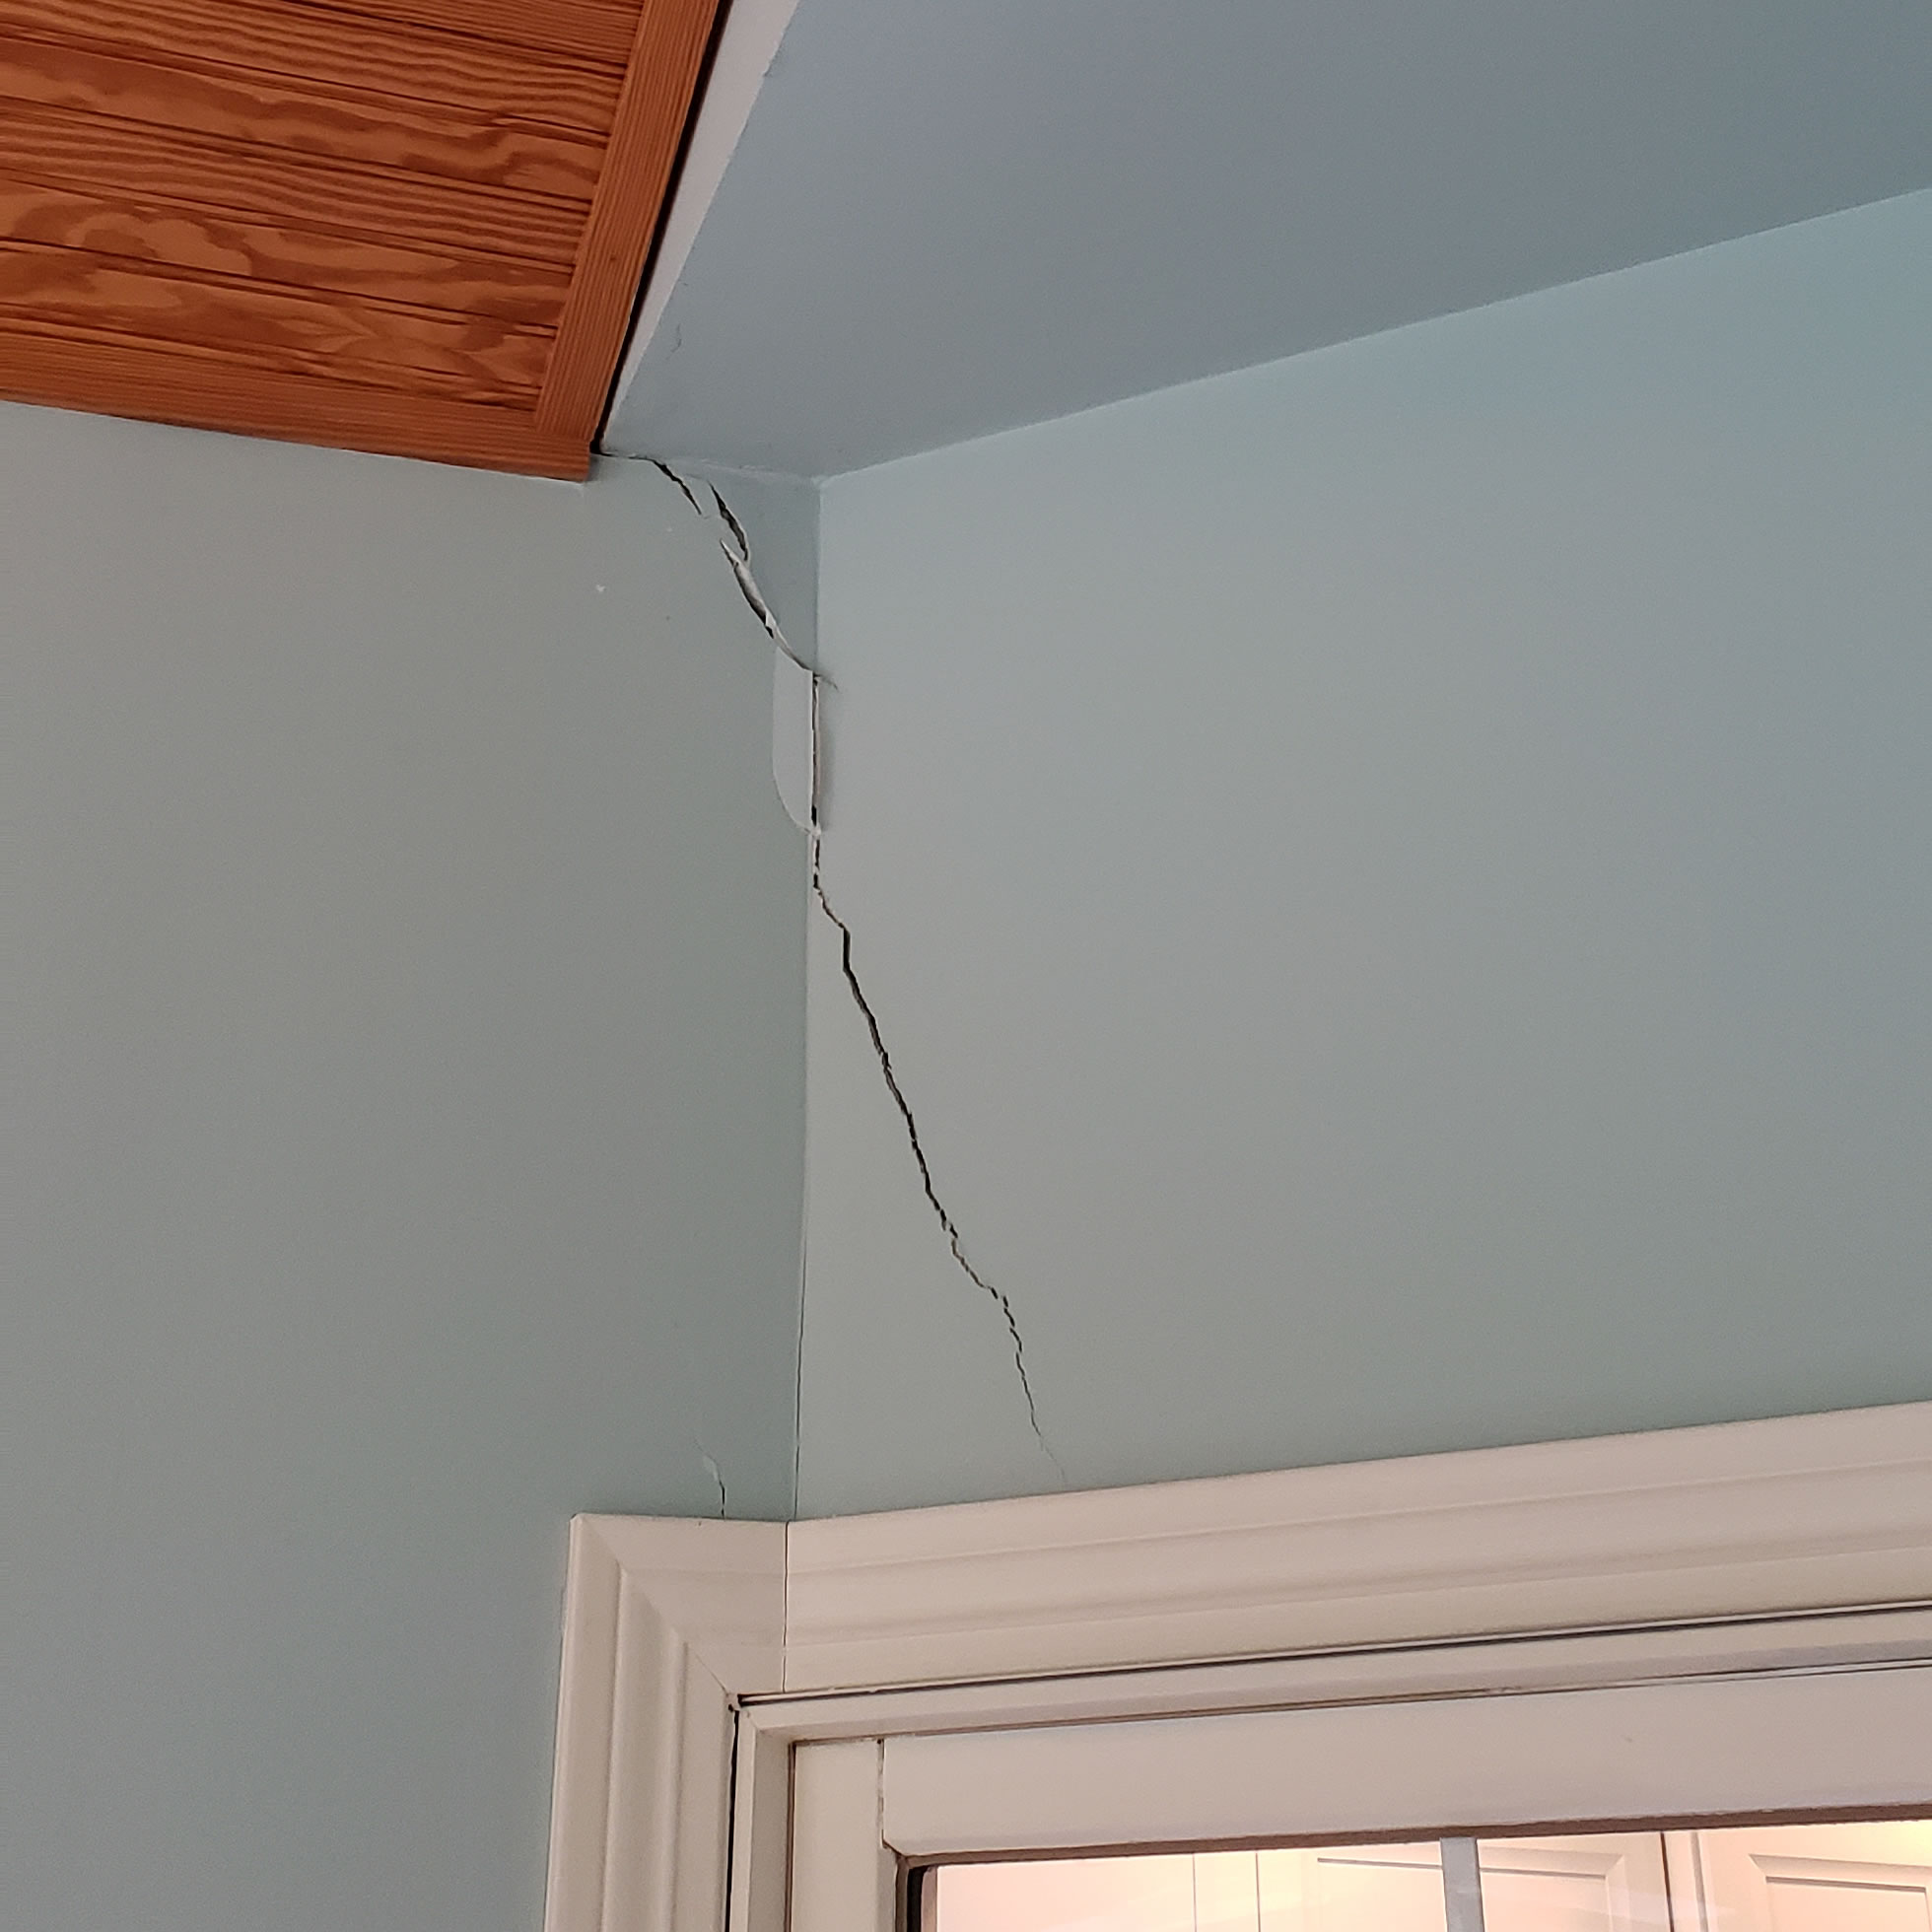 Cracks in Drywall - Very common when the foundation settles